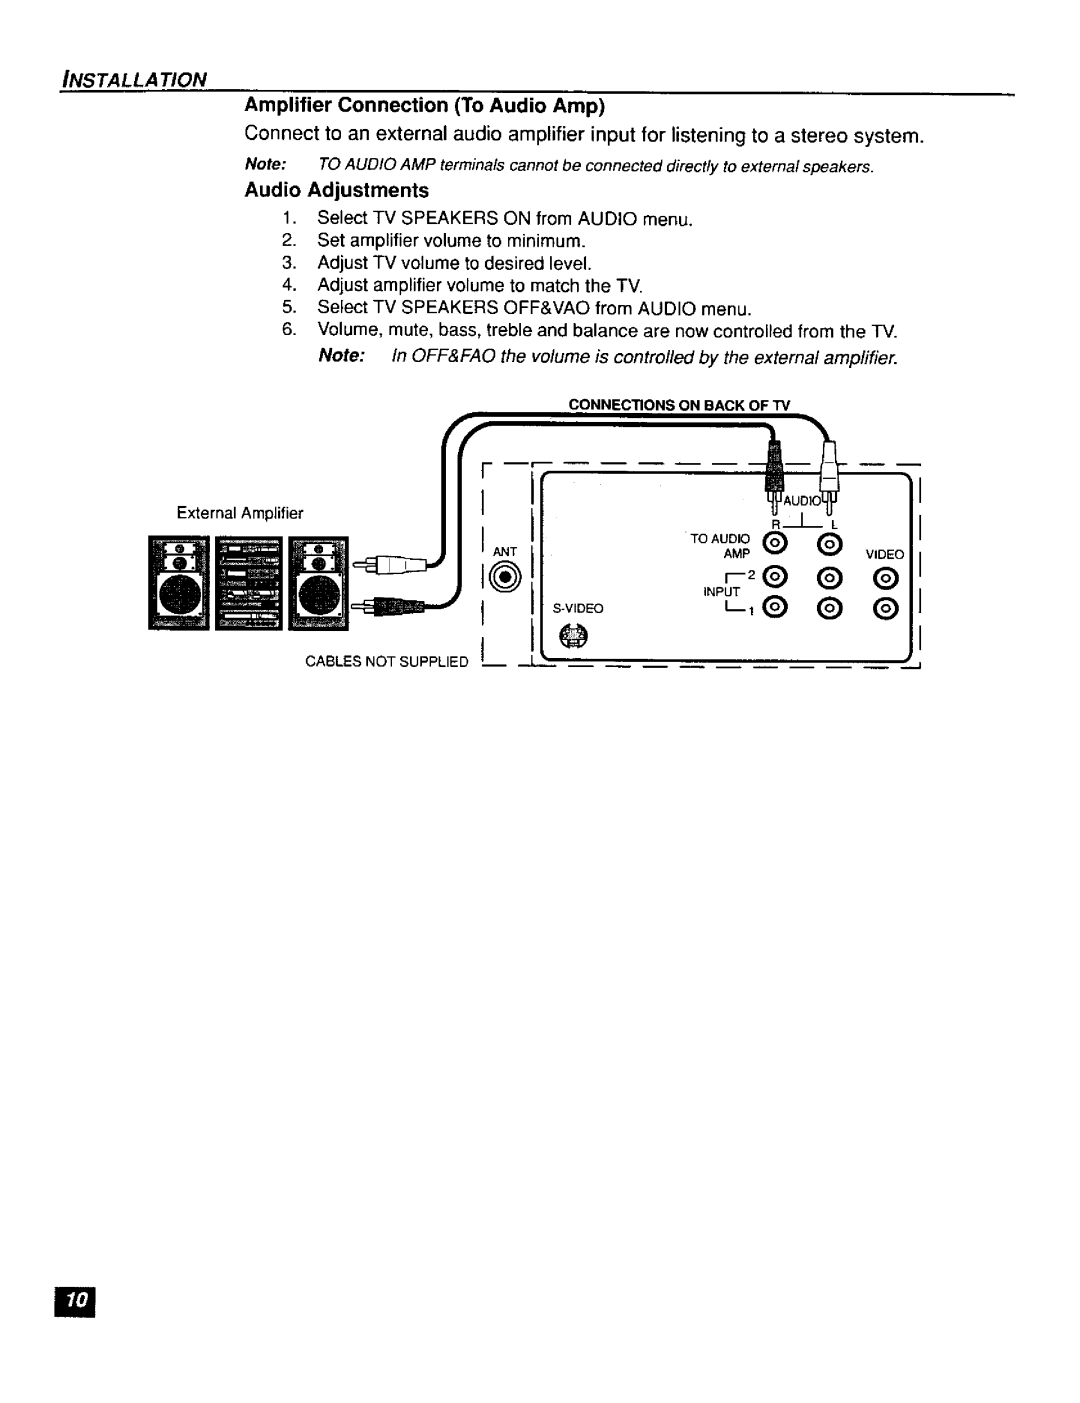 Panasonic CT-F2111X, CT-F2121L manual Note In OFF&FAO the volume is controlled by the external ampfifier 